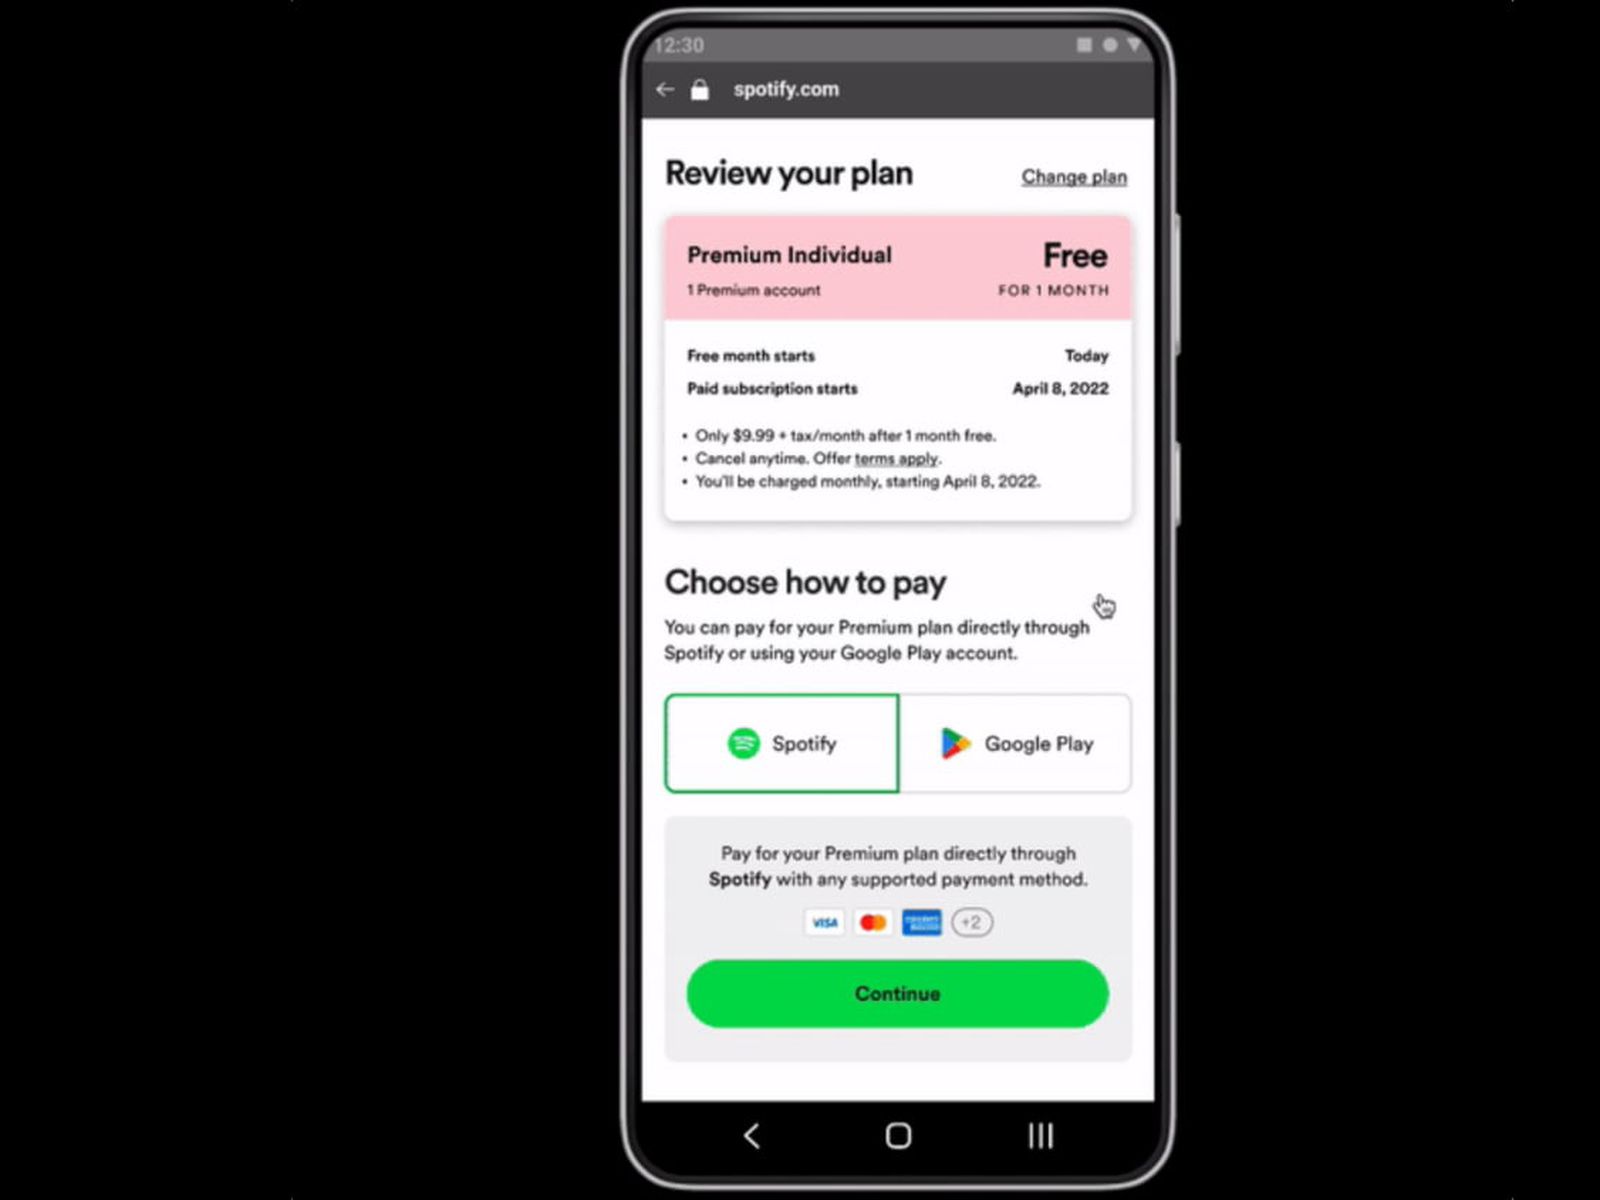 A secret Google deal let Spotify completely bypass Android's app store fees  - The Verge